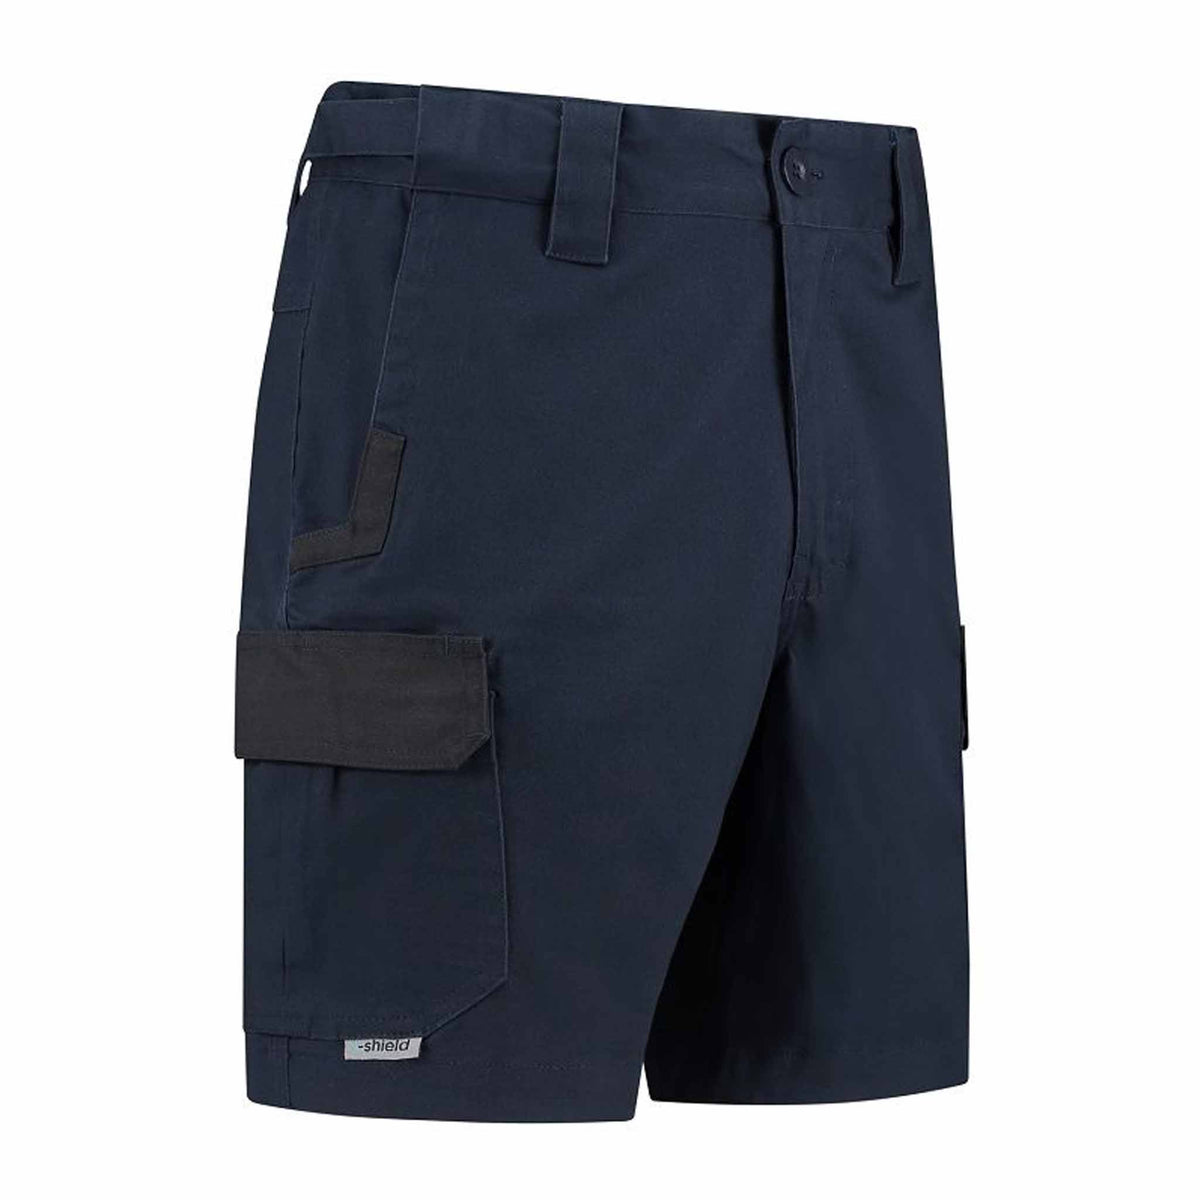 navy shorts 247 series side view